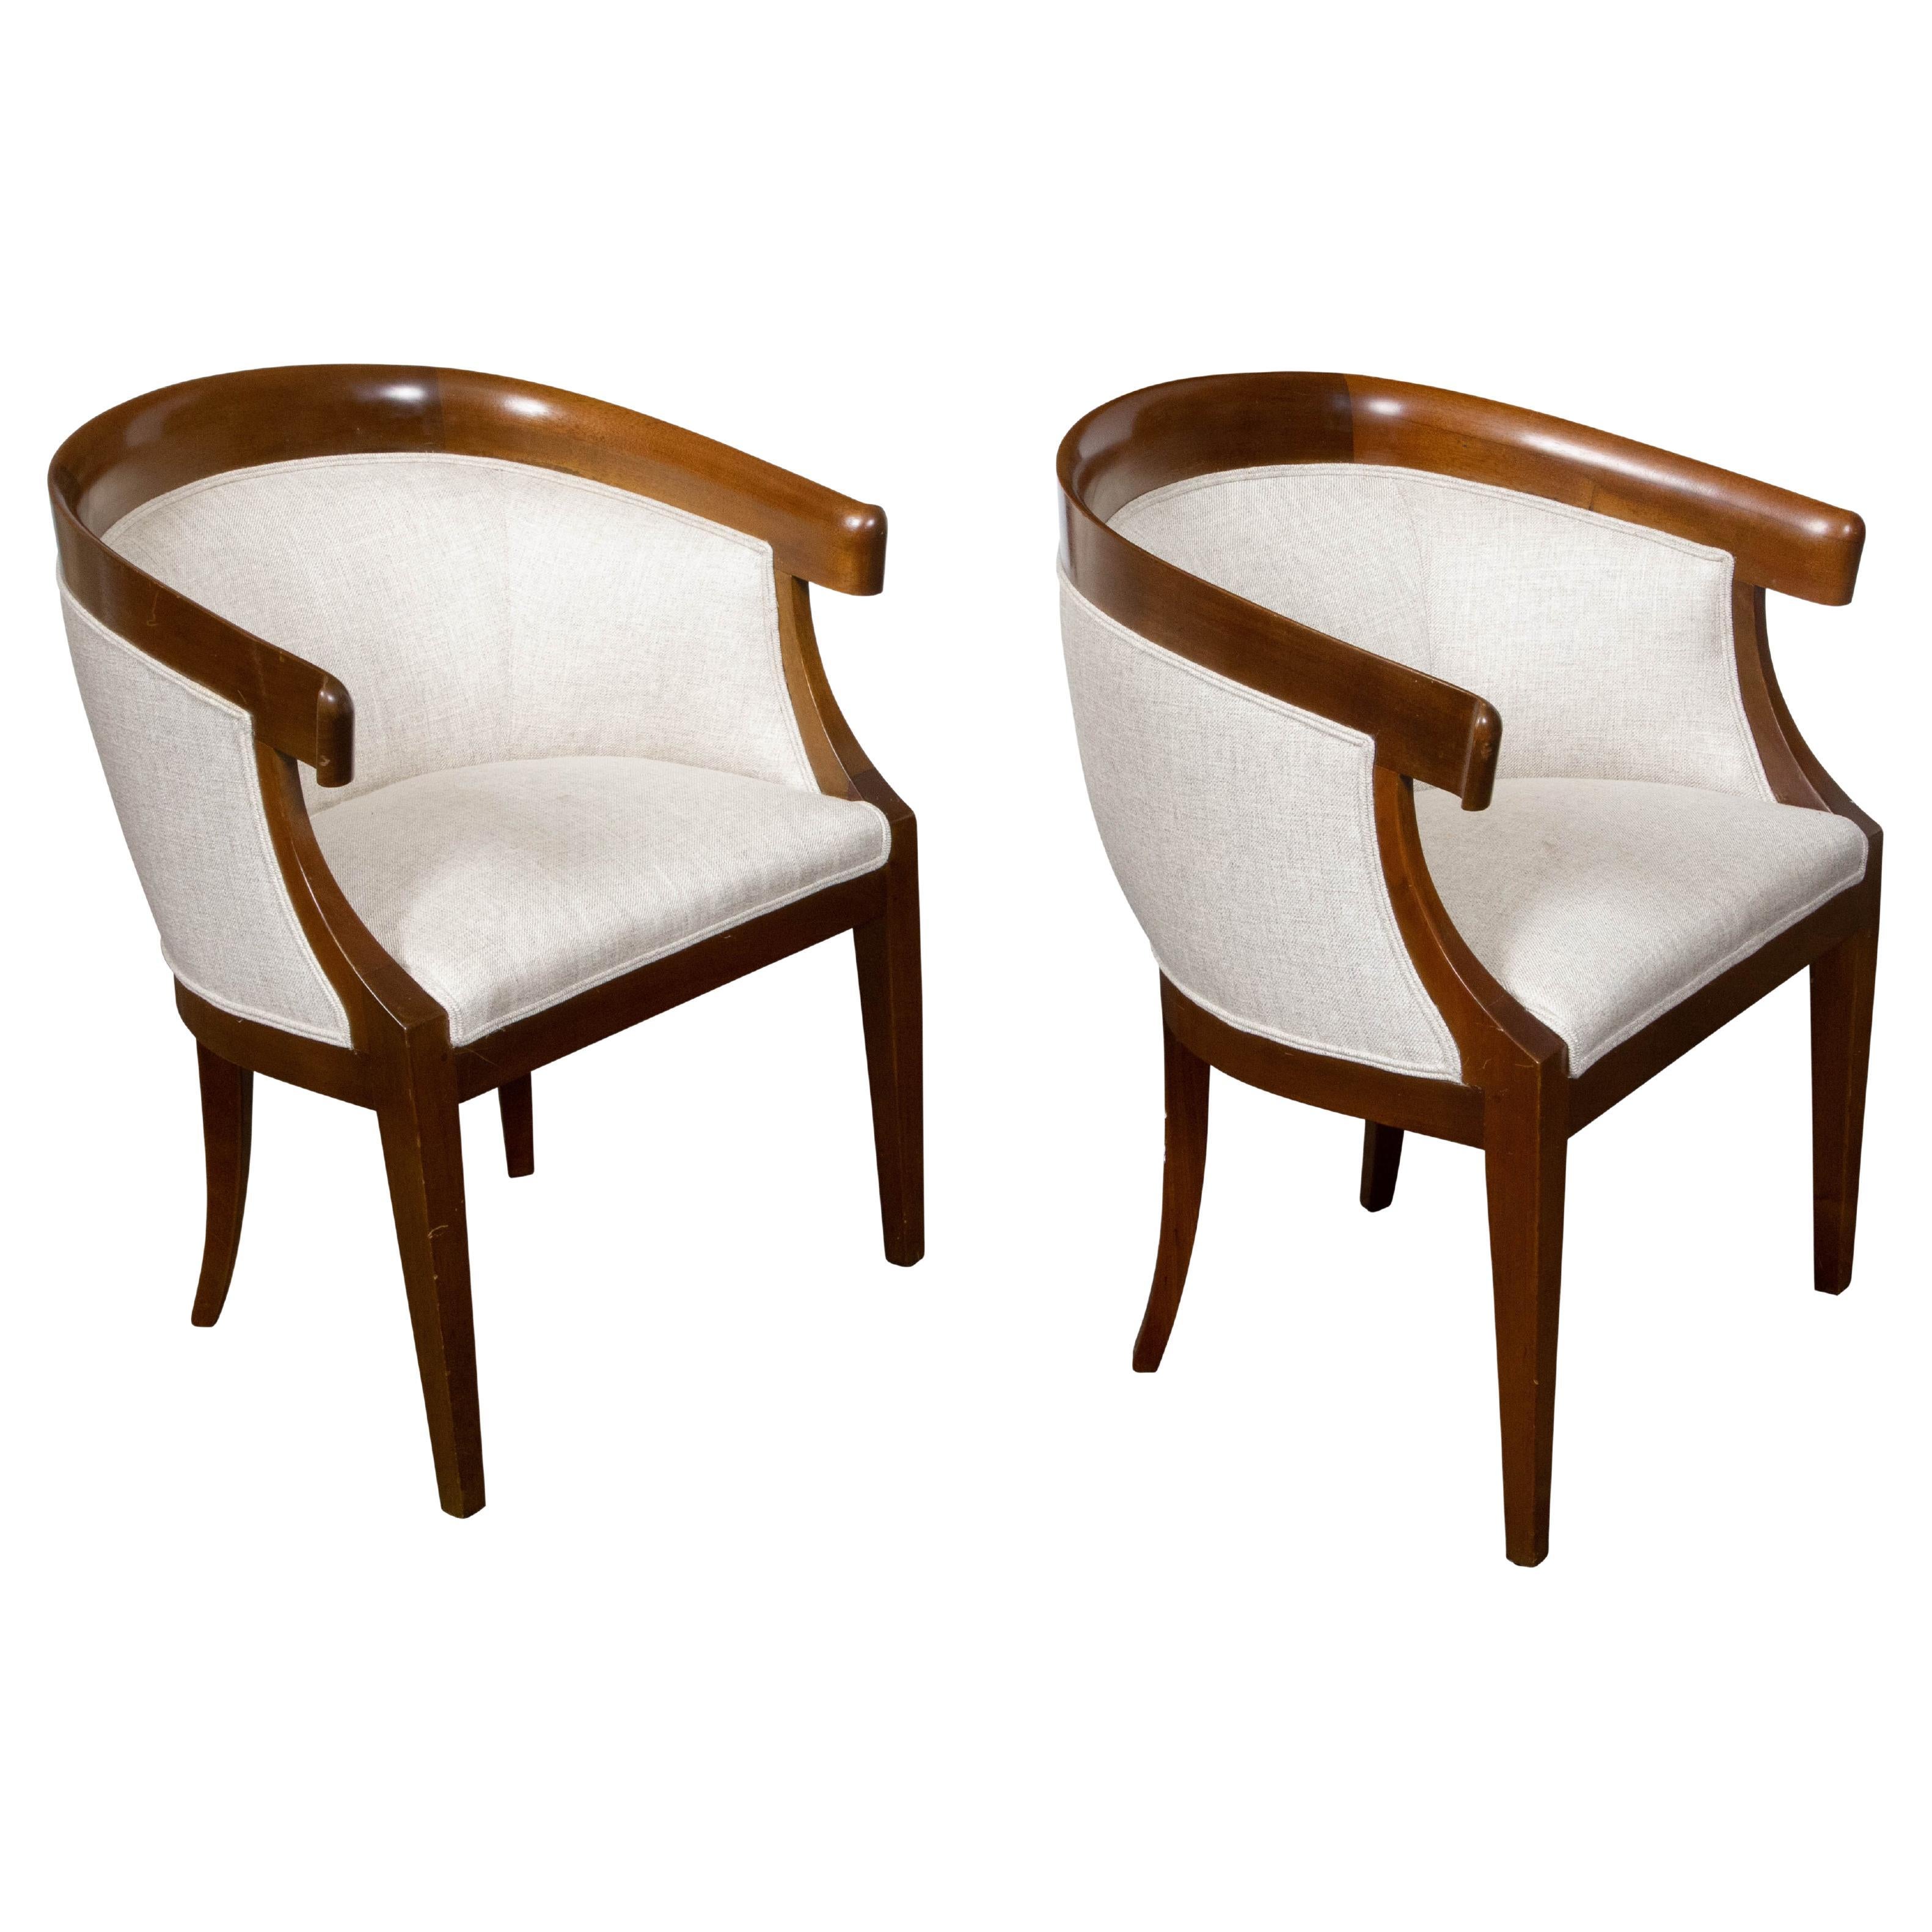 Pair of French Art Deco Period 1930s Walnut Horseshoe Back Upholstered Armchairs